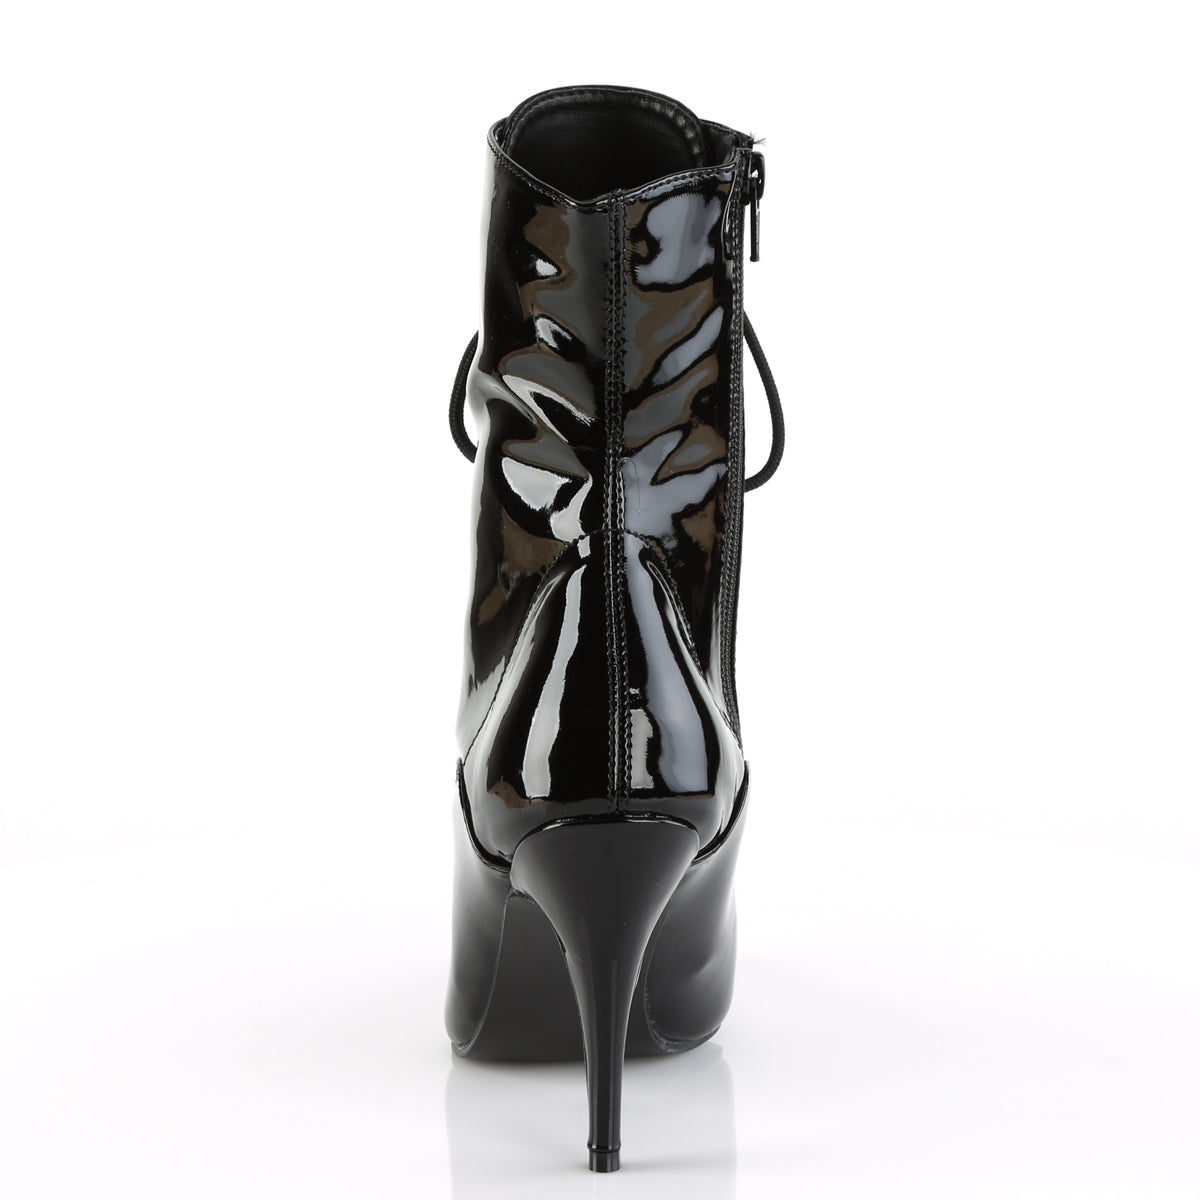 VANITY-1020 Pleaser Black Patent Single Sole Shoes [Kinky Boots]